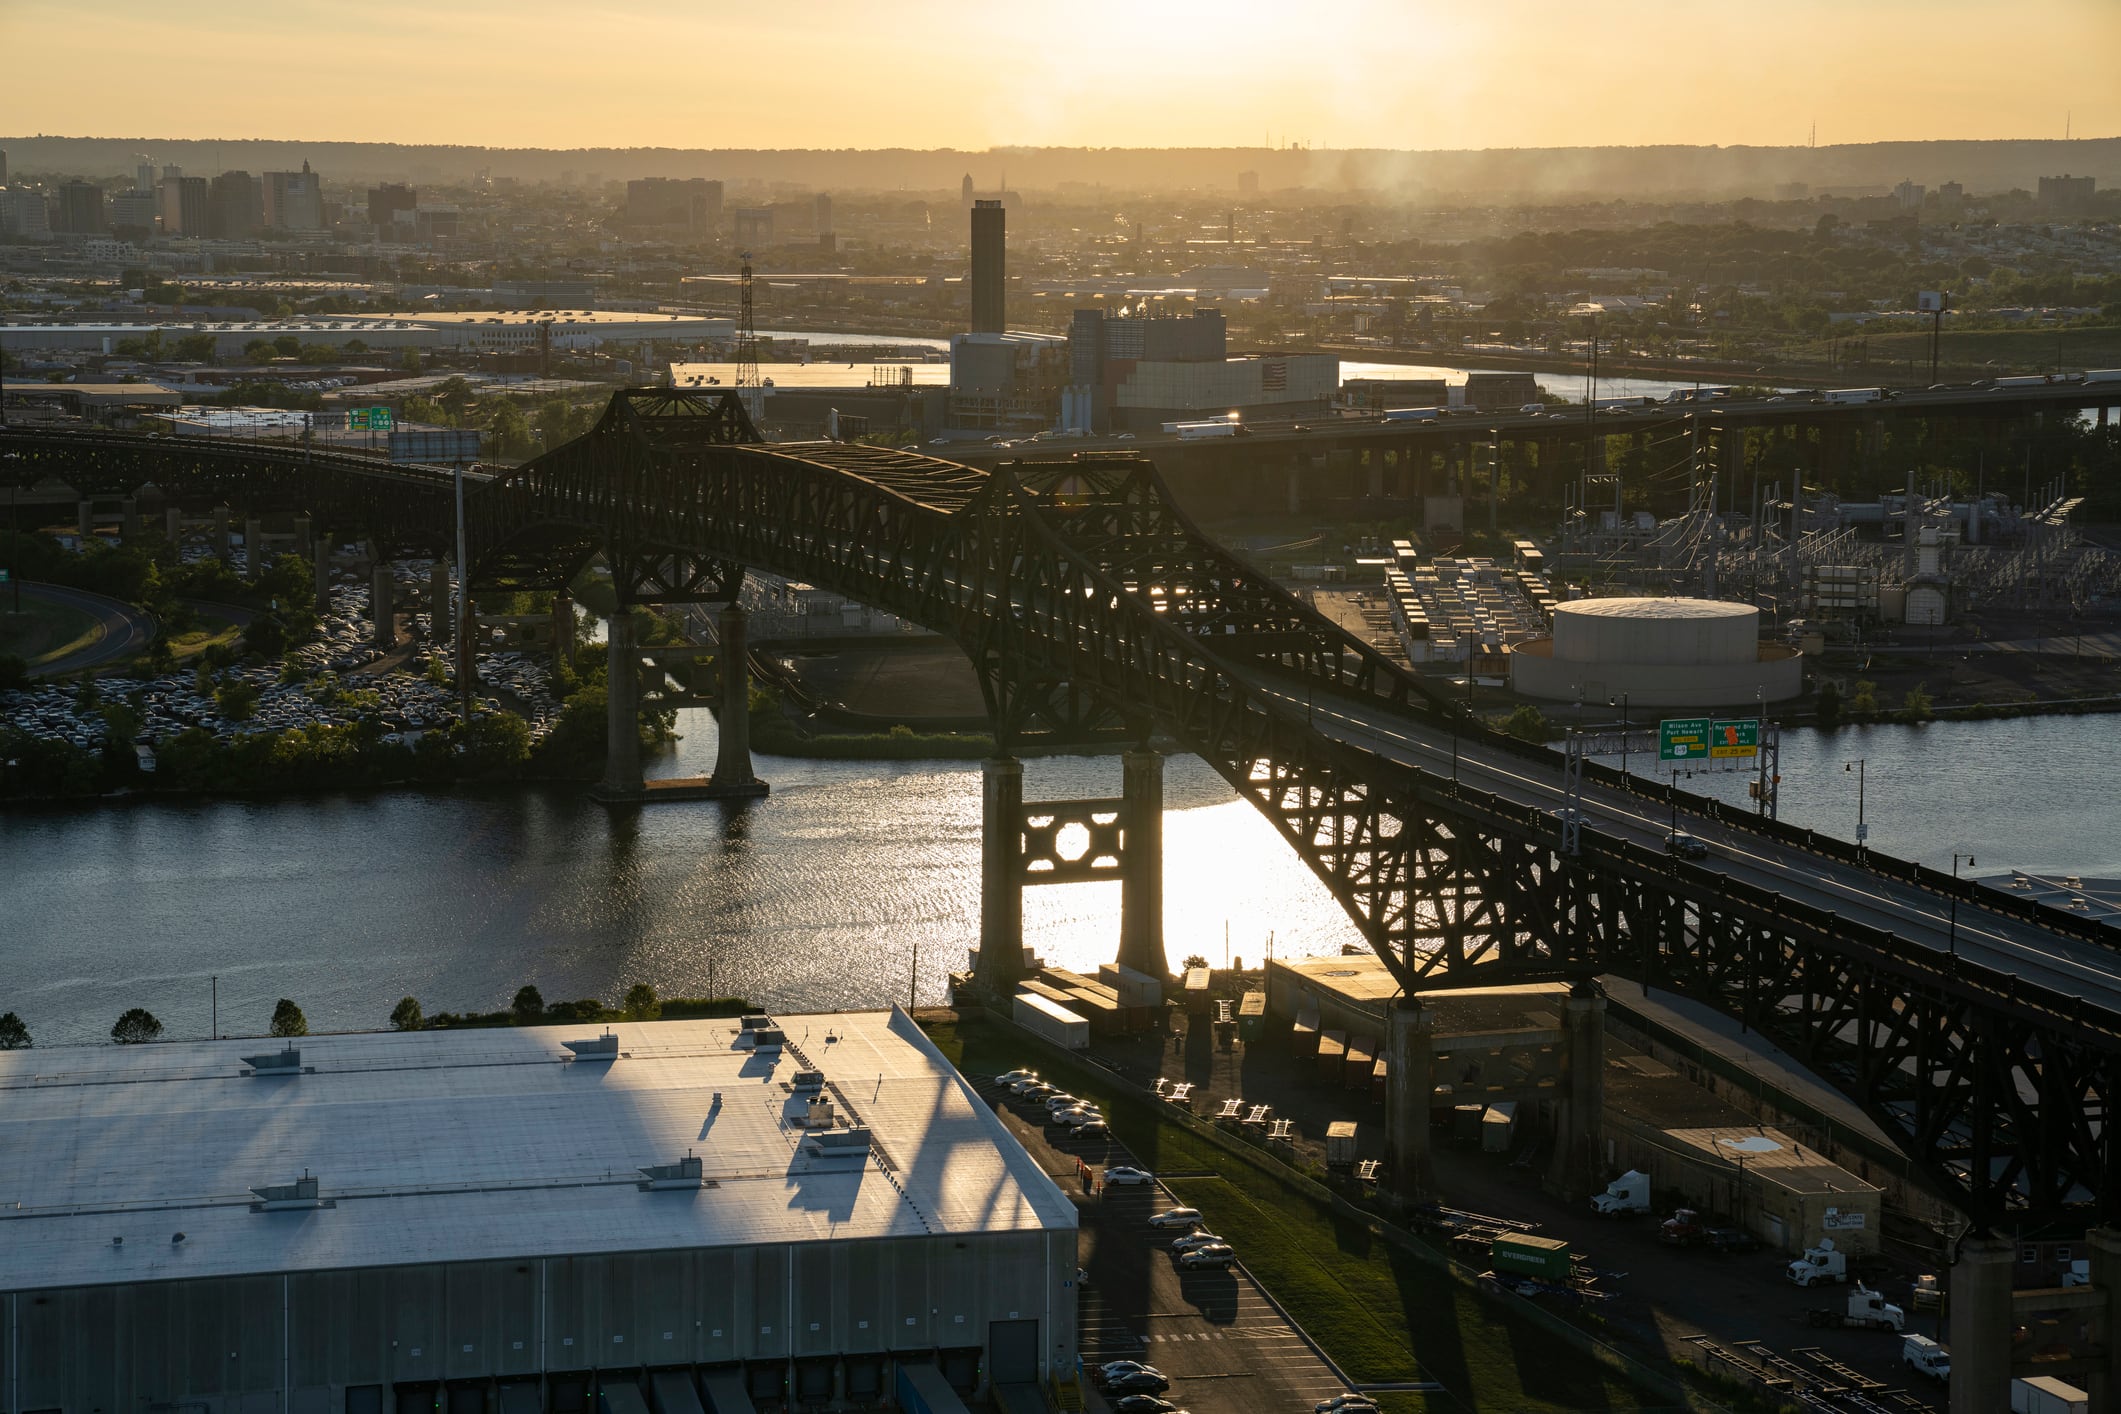 Aerial photo of the Pulaski Skyway bridge connecting Newark and Jersey City at sunset. The photo captures the bridge and surrounding buildings as the sunset is reflecting off of the Hackensack river.